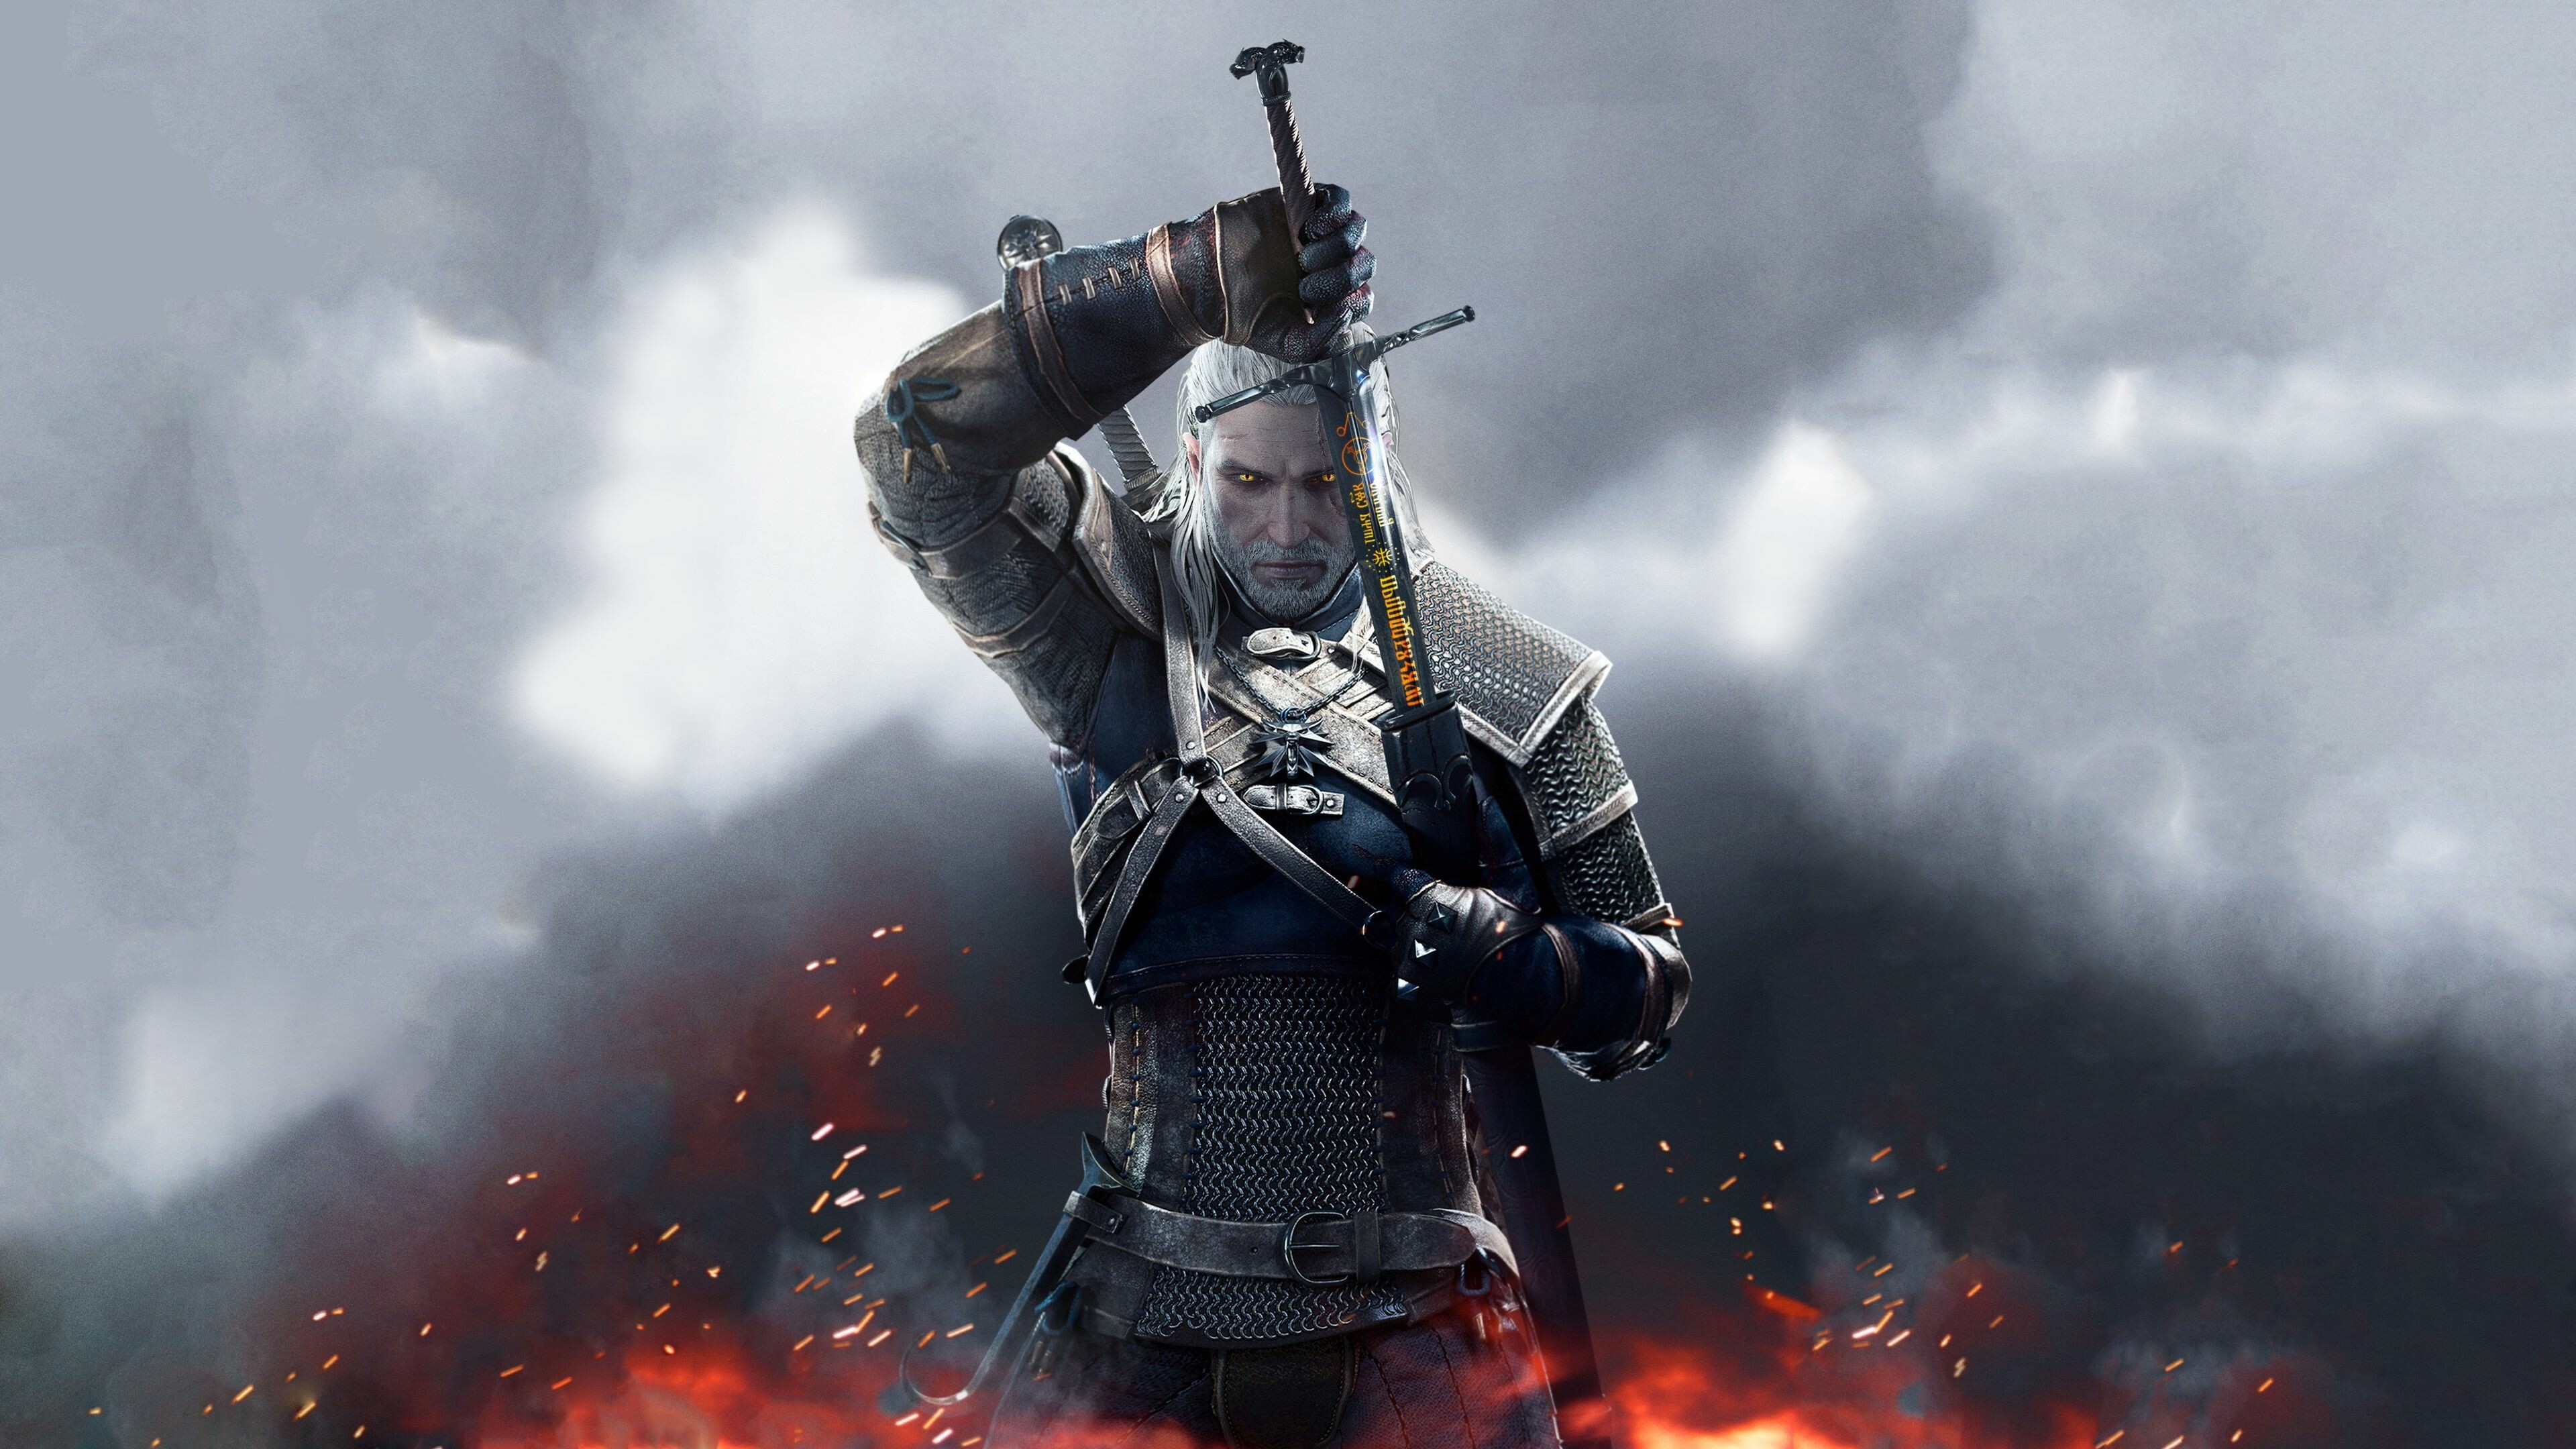 The Witcher (Game): A series of fantasy action role-playing games developed by CD Projekt Red. 3840x2160 4K Background.